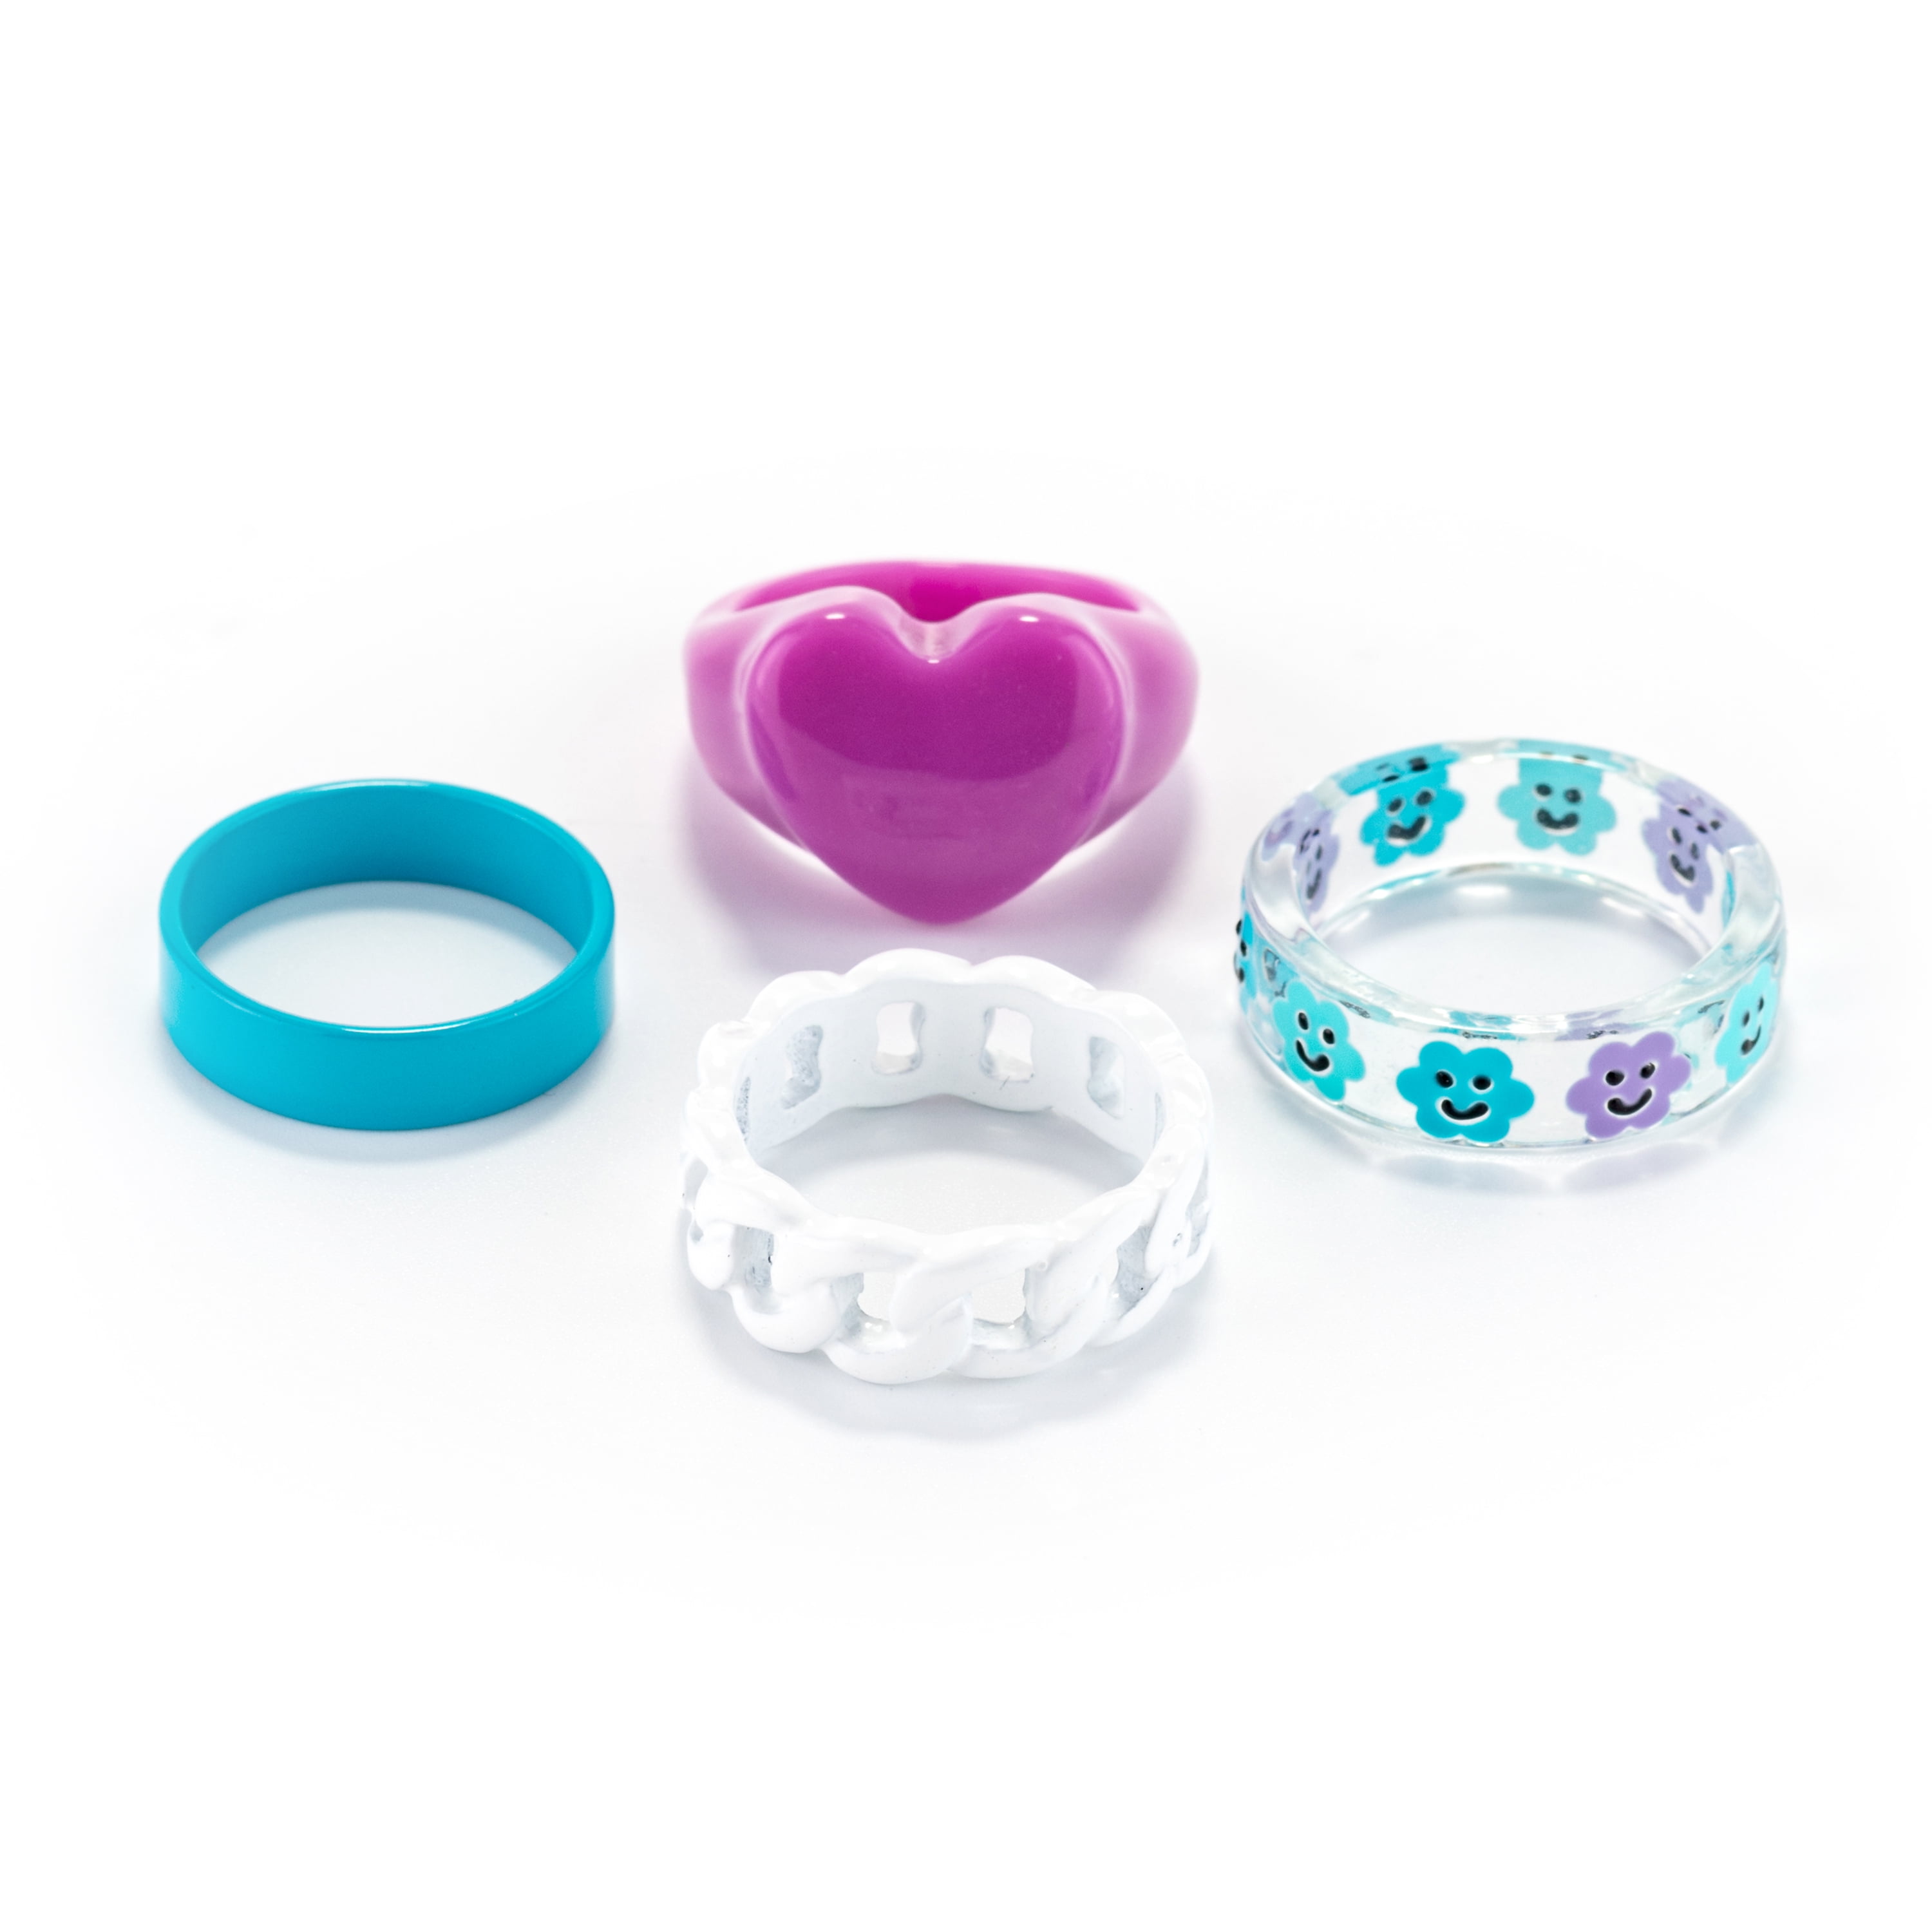 Claire's Women's Heart Daisy Resin Rings Set, Ring Size 8/9, Large